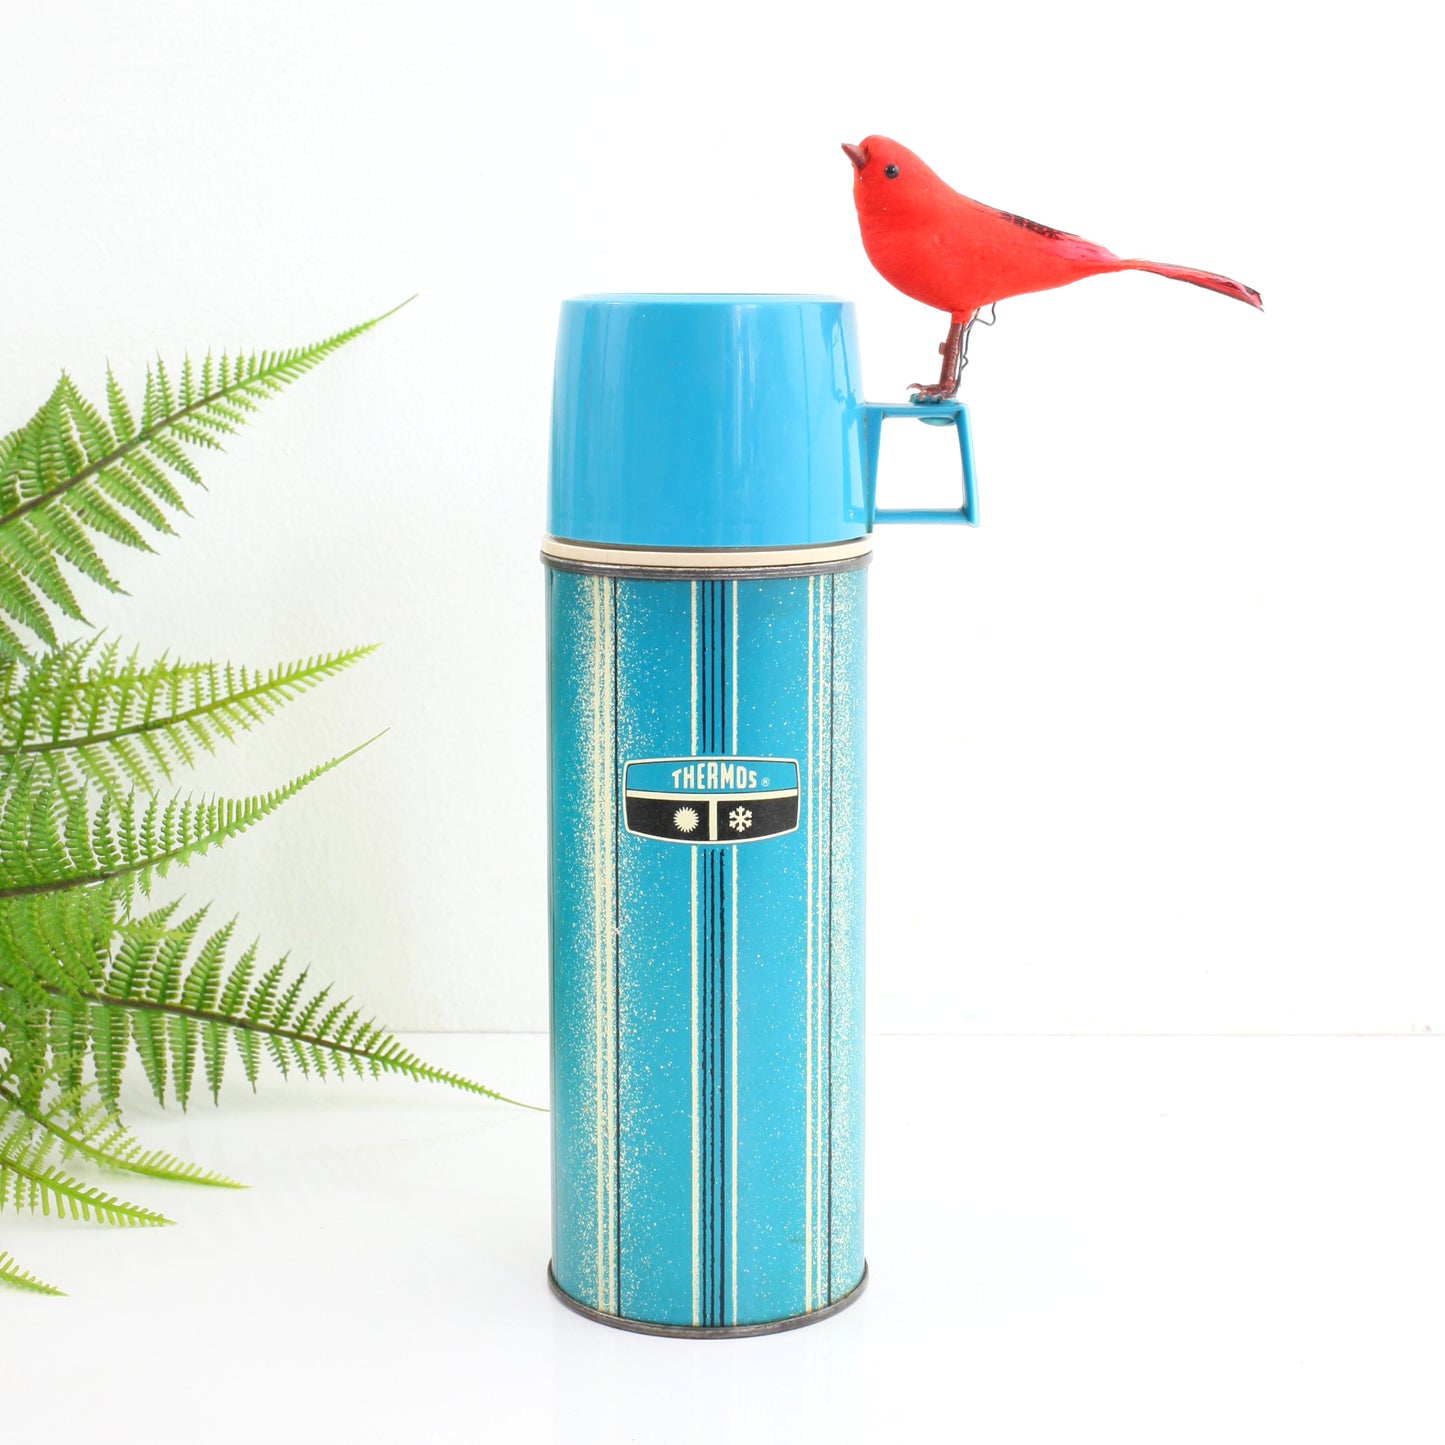 SOLD - Vintage 1969 Blue Stripe Thermos / Pint Size